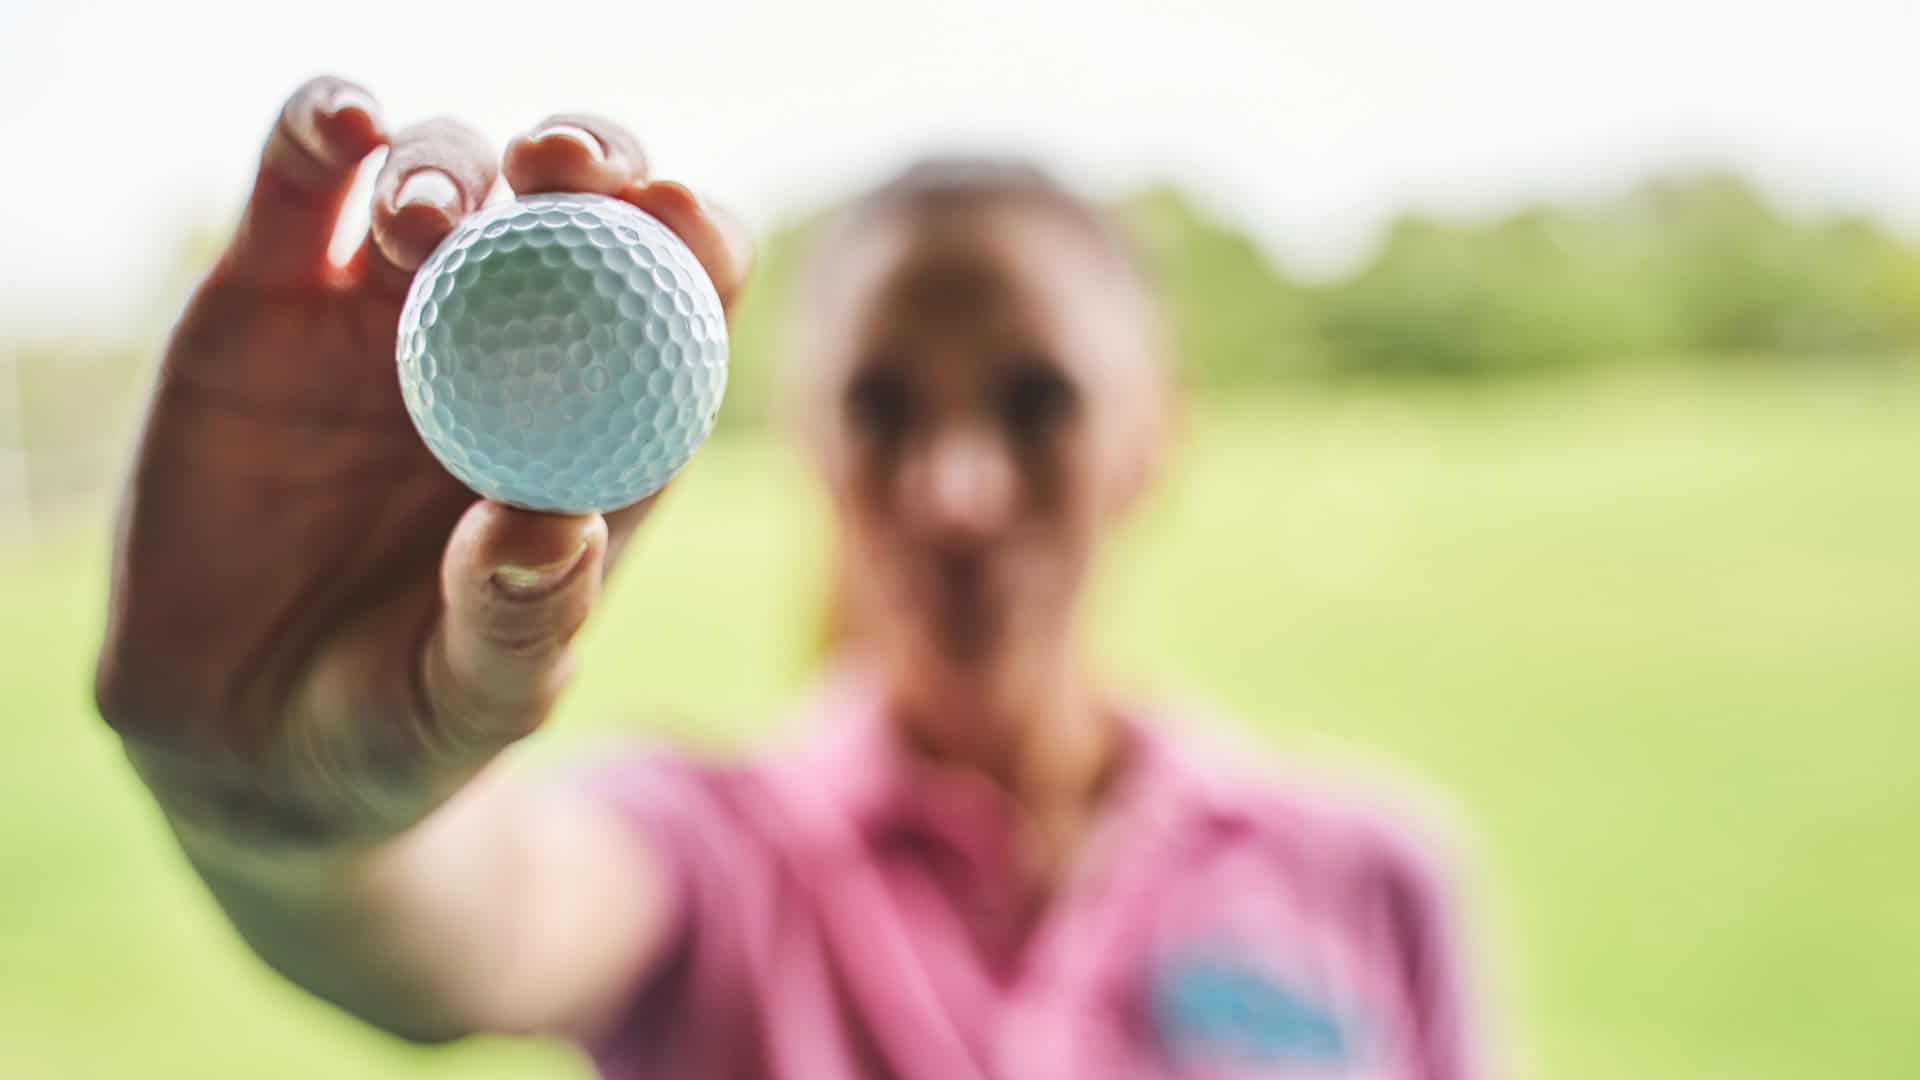 The image shows a woman holding a golf ball close to the camera, with the ball in sharp focus and the woman blurred in the background. She appears to be wearing a pink shirt and is outdoors, likely on a golf course. The focus on the ball highlights its texture and dimples.